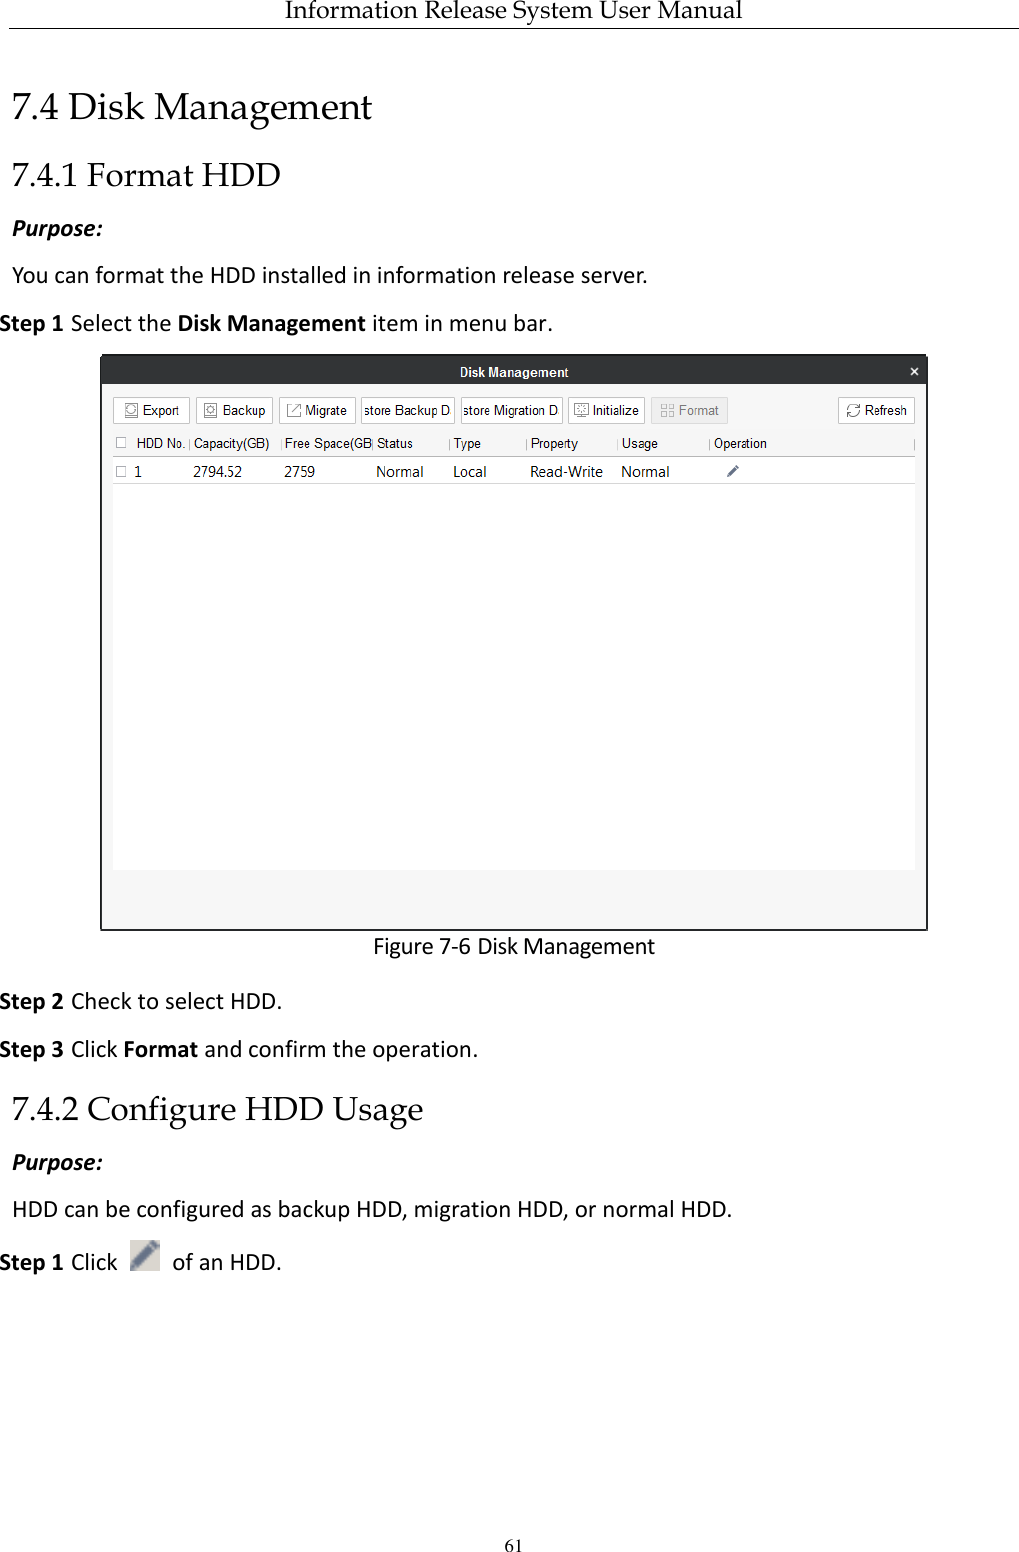 Information Release System User Manual 61 7.4 Disk Management 7.4.1 Format HDD Purpose: You can format the HDD installed in information release server. Step 1 Select the Disk Management item in menu bar.  Figure 7-6 Disk Management Step 2 Check to select HDD. Step 3 Click Format and confirm the operation. 7.4.2 Configure HDD Usage Purpose: HDD can be configured as backup HDD, migration HDD, or normal HDD. Step 1 Click    of an HDD. 